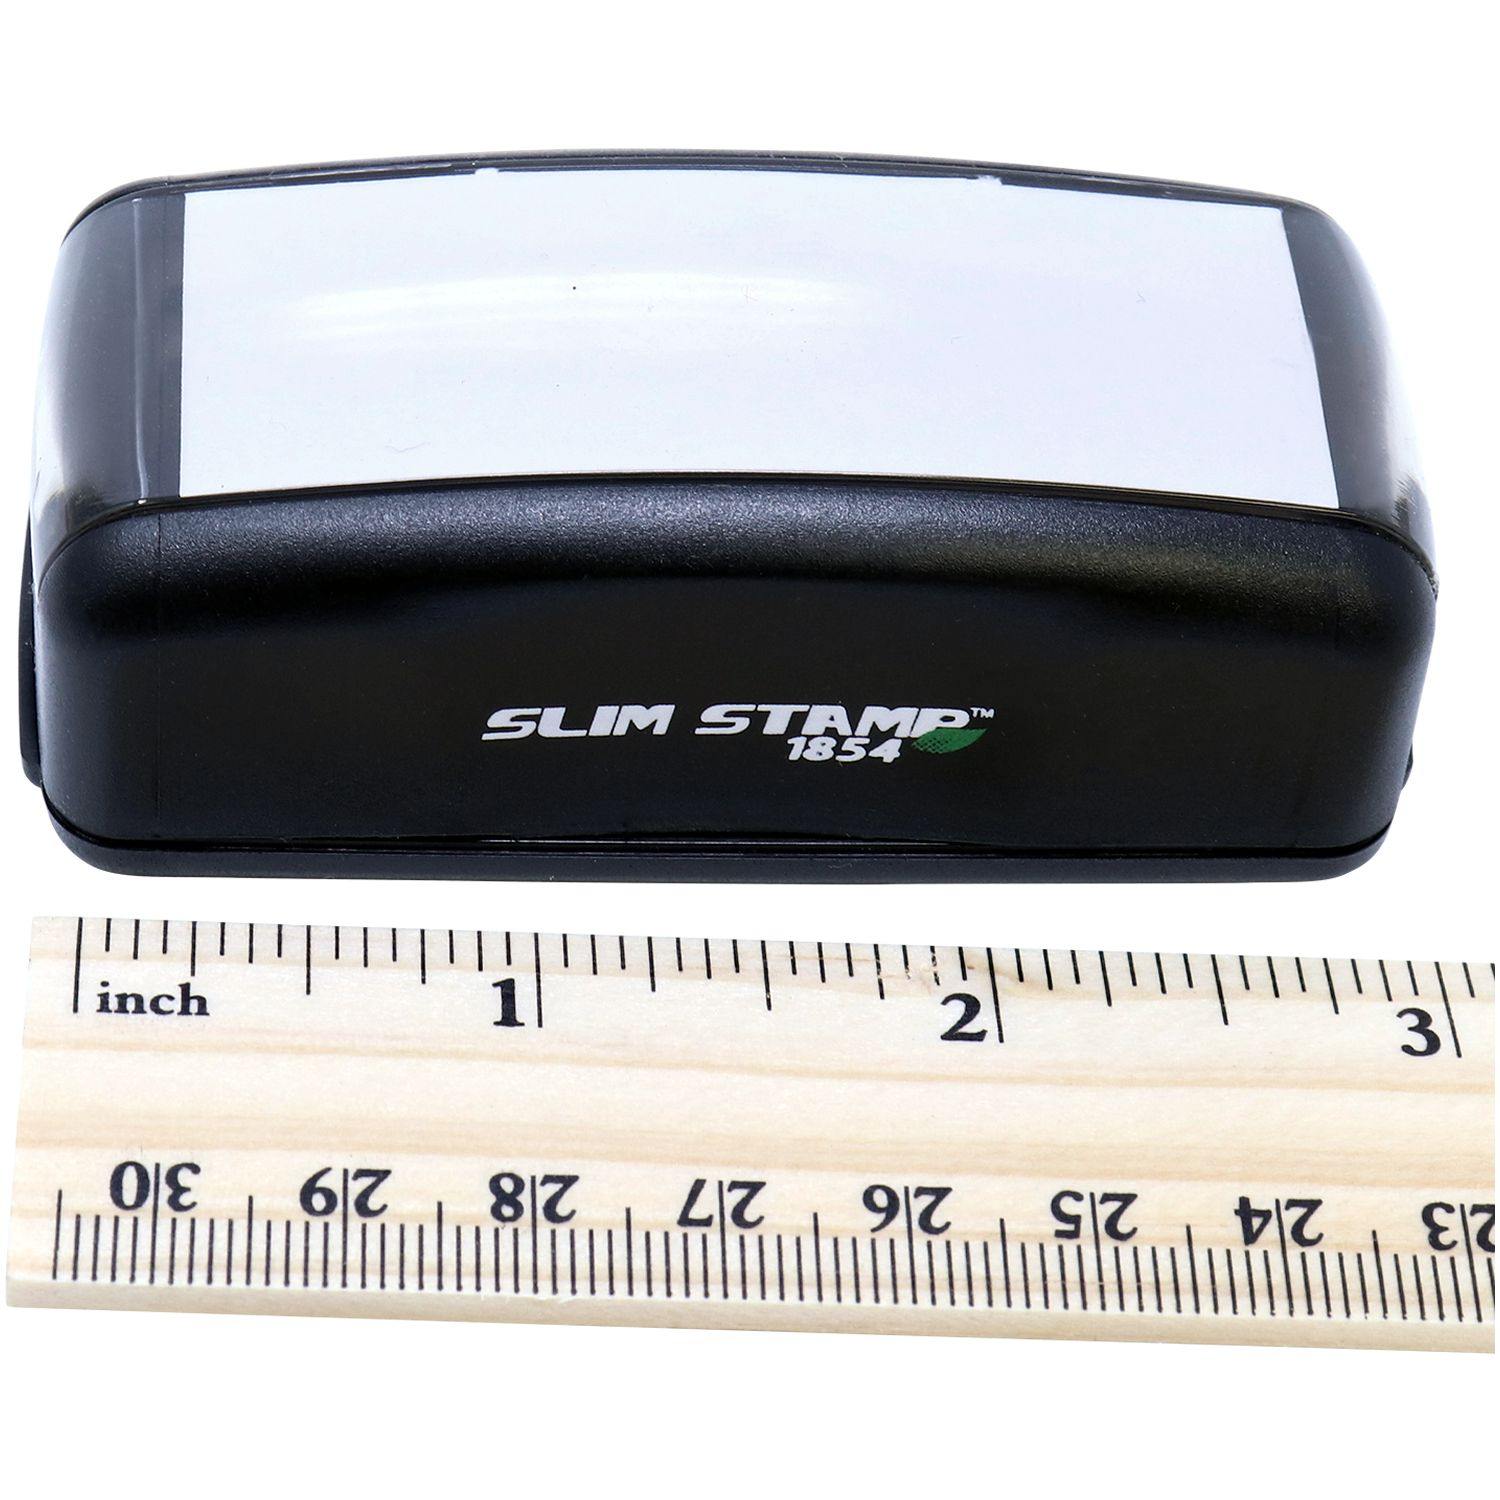 Measurement Large Pre Inked File Copy Stamp with Ruler